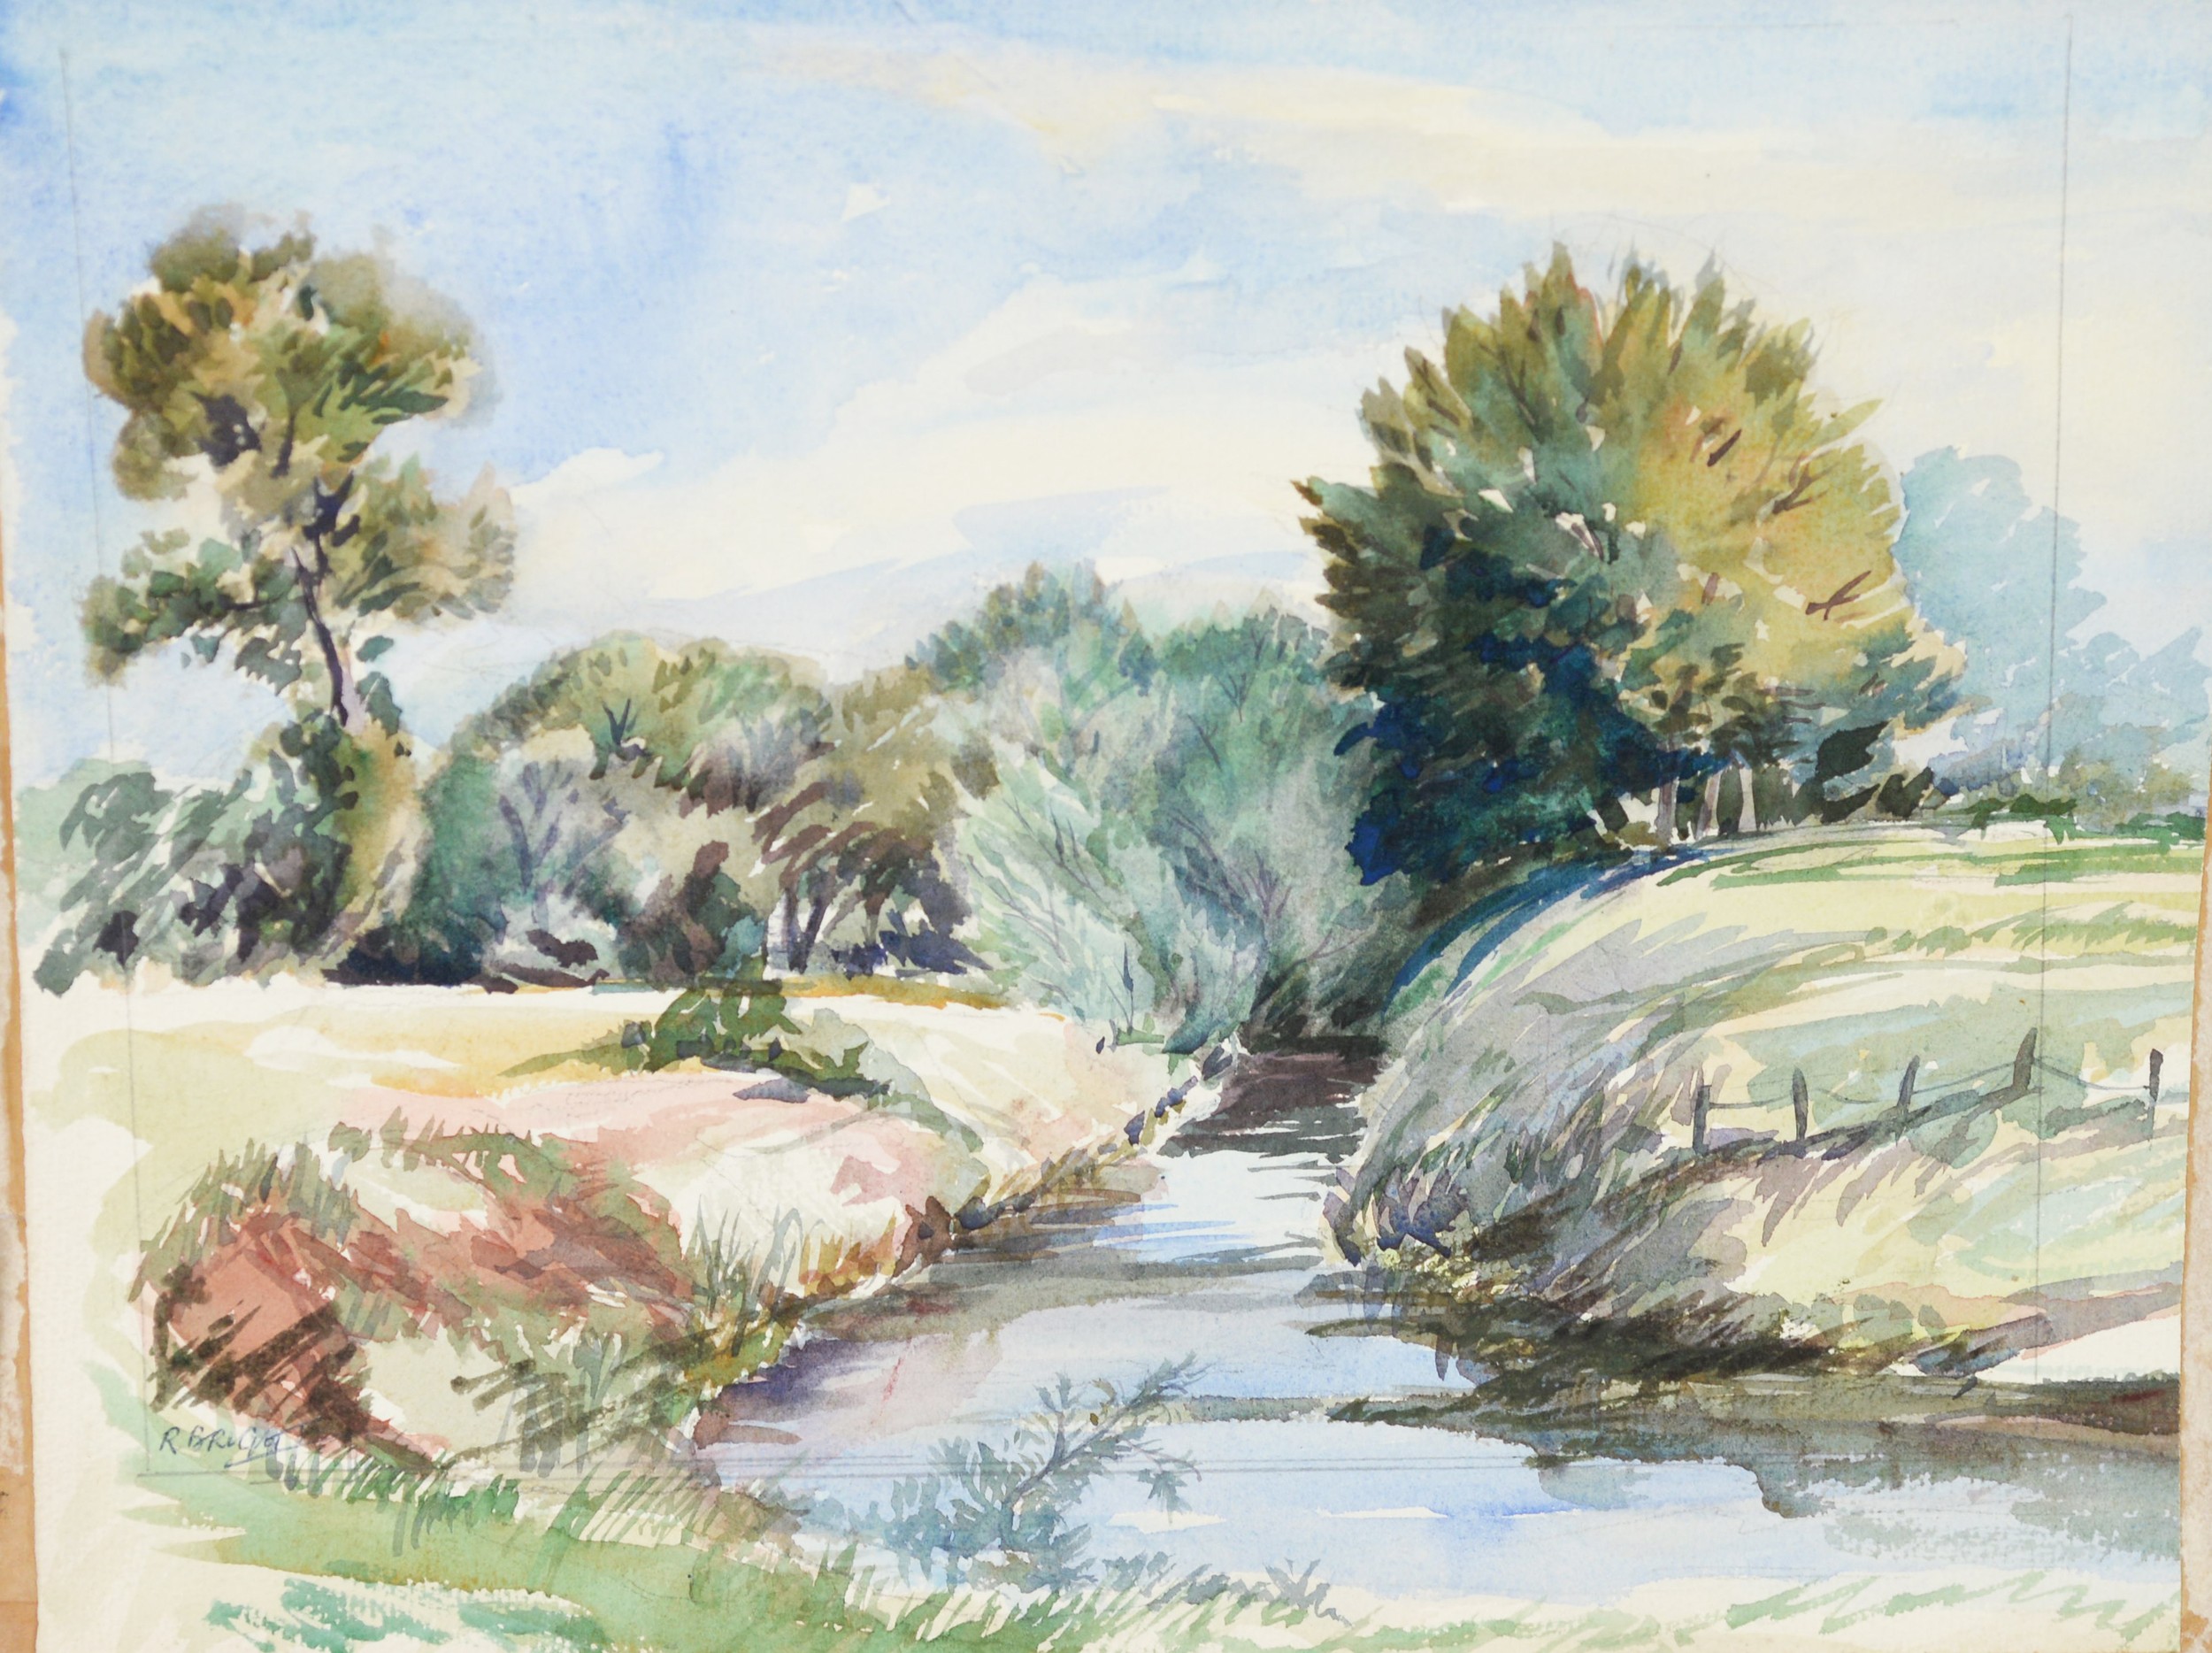 RUTH BRIGHT (20th CENTURY), IN EXCESS OF 100 UNFRAMED WATERCOLOUR DRAWINGS, MOSTLY LANDSCAPE - Image 3 of 4